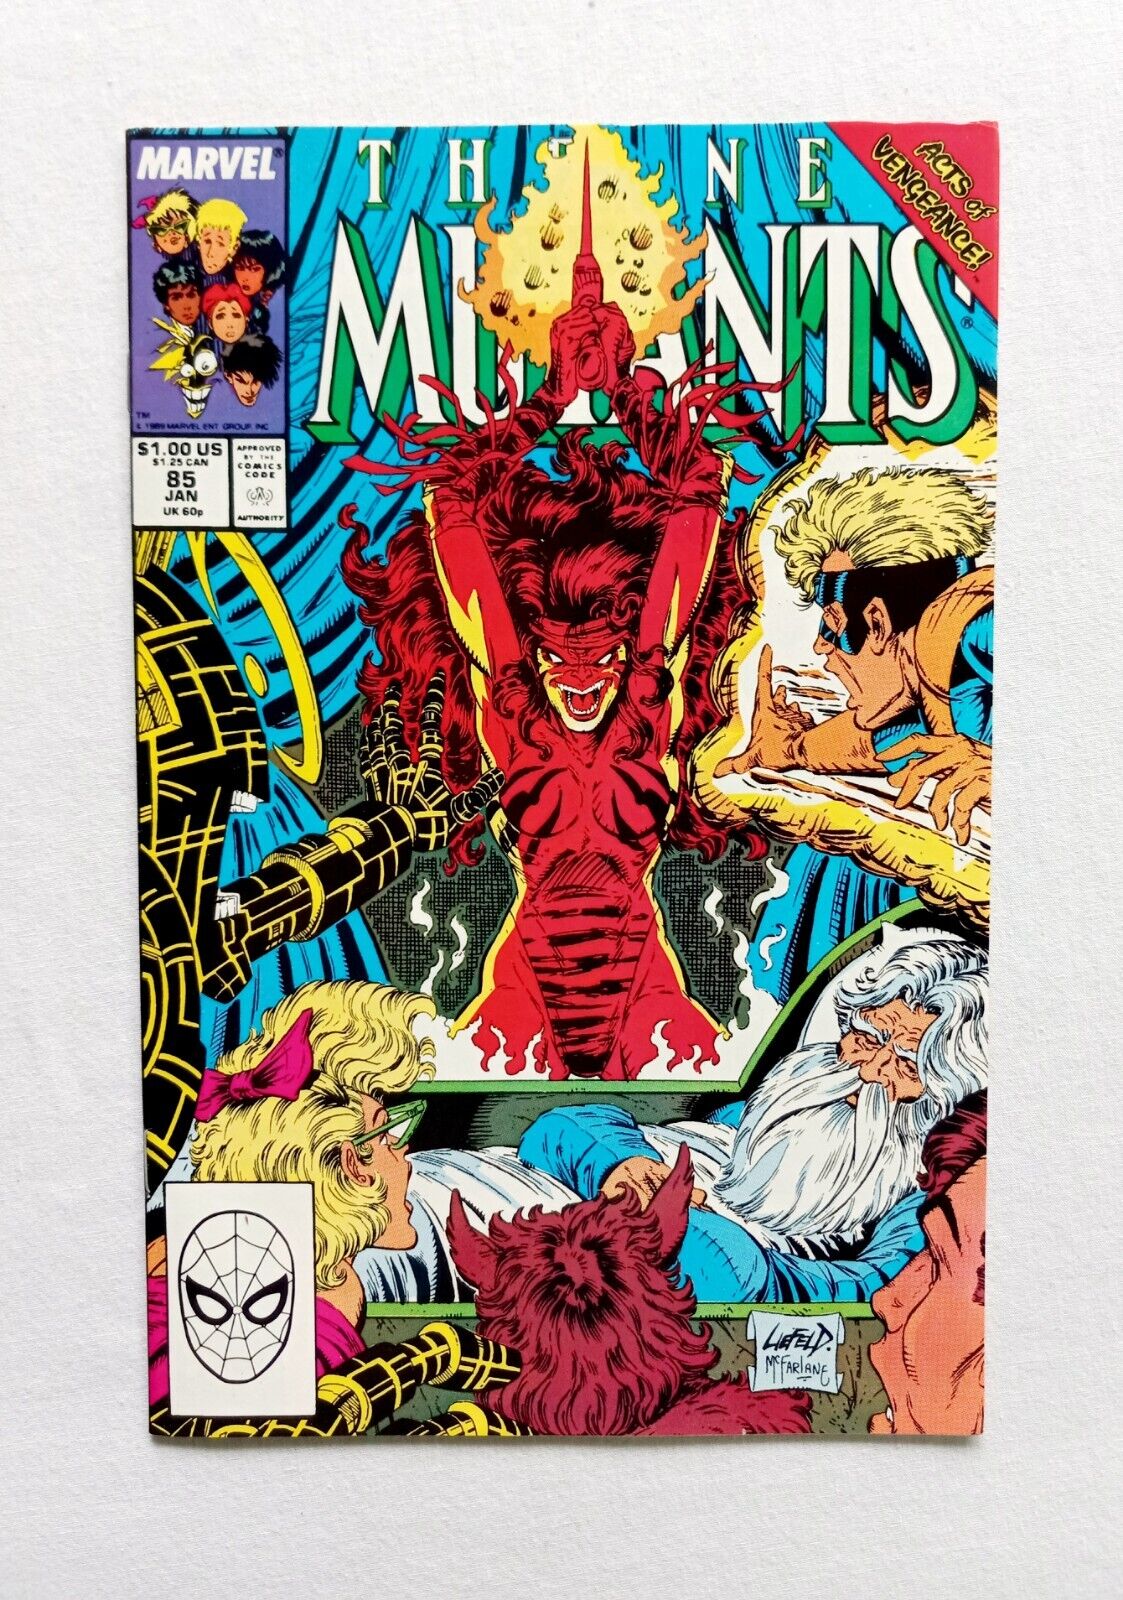 New Mutants #85 - 1990 Early Todd McFarlane Rob Liefeld Collaboration Marvel 